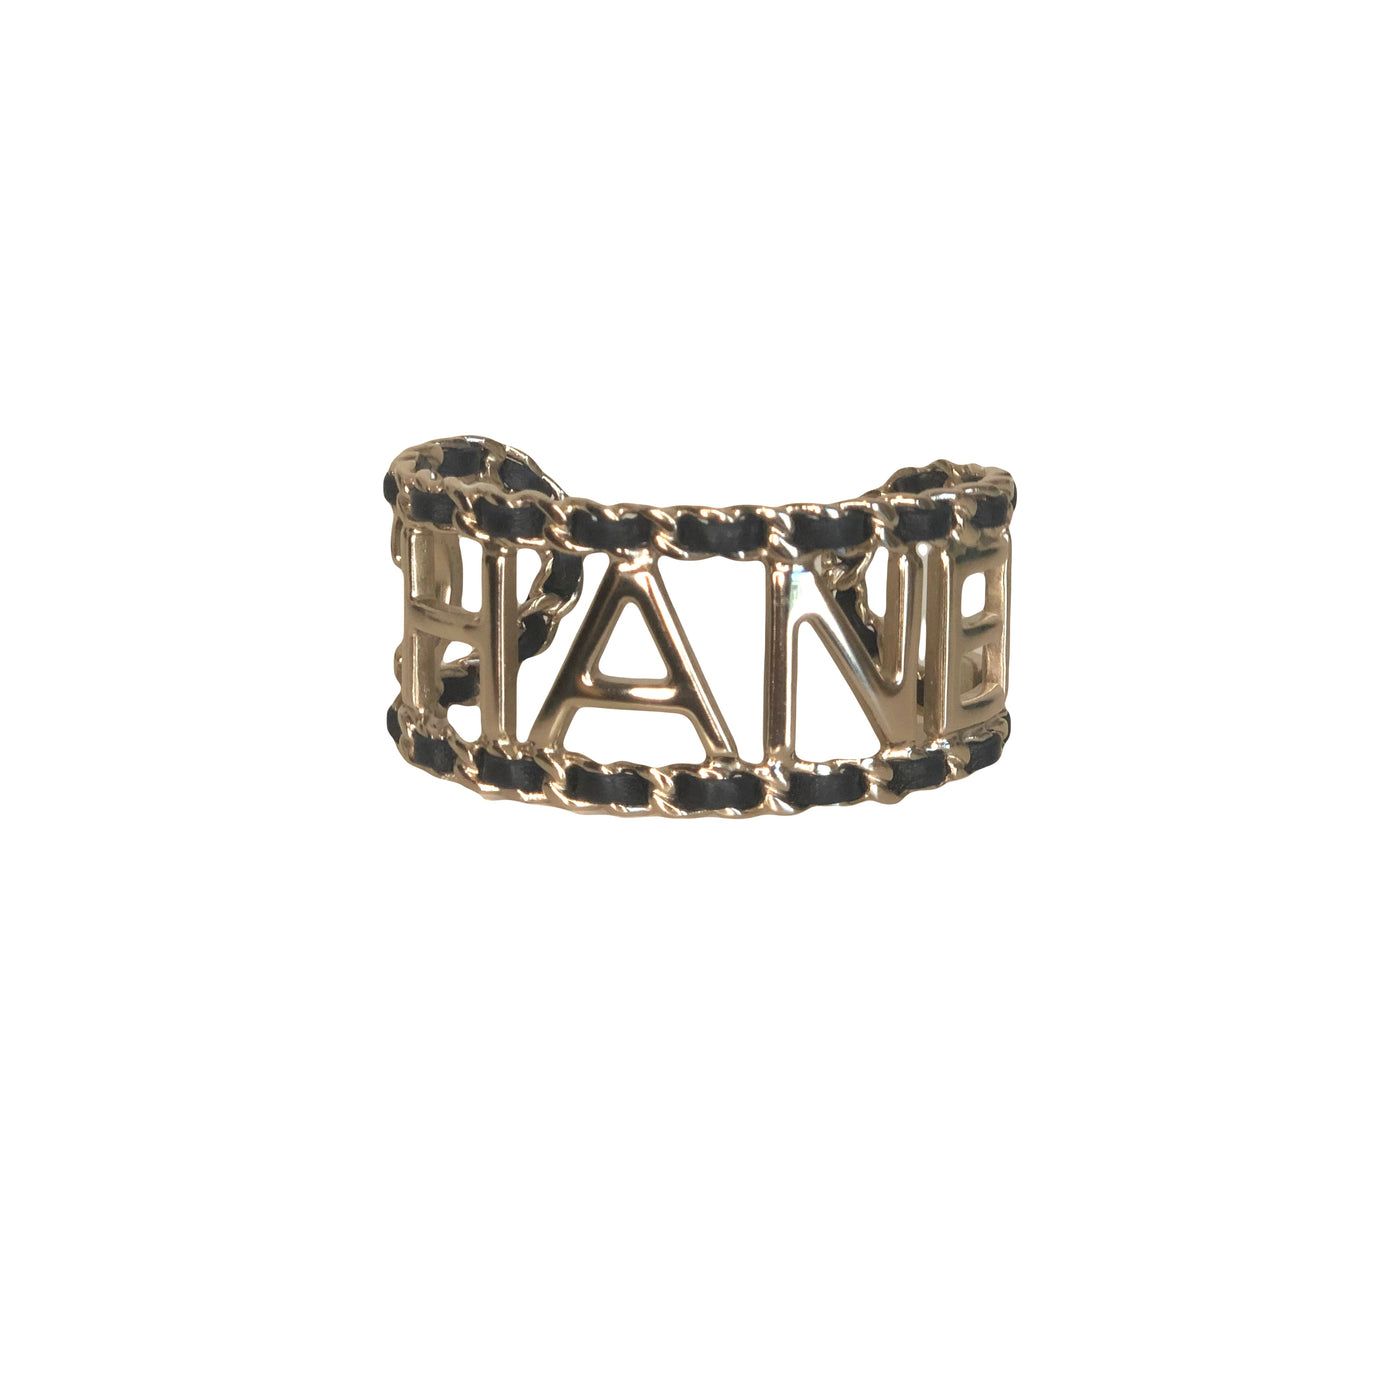 CHANEL light gold hardware with leather intertwined cuff size L 2020